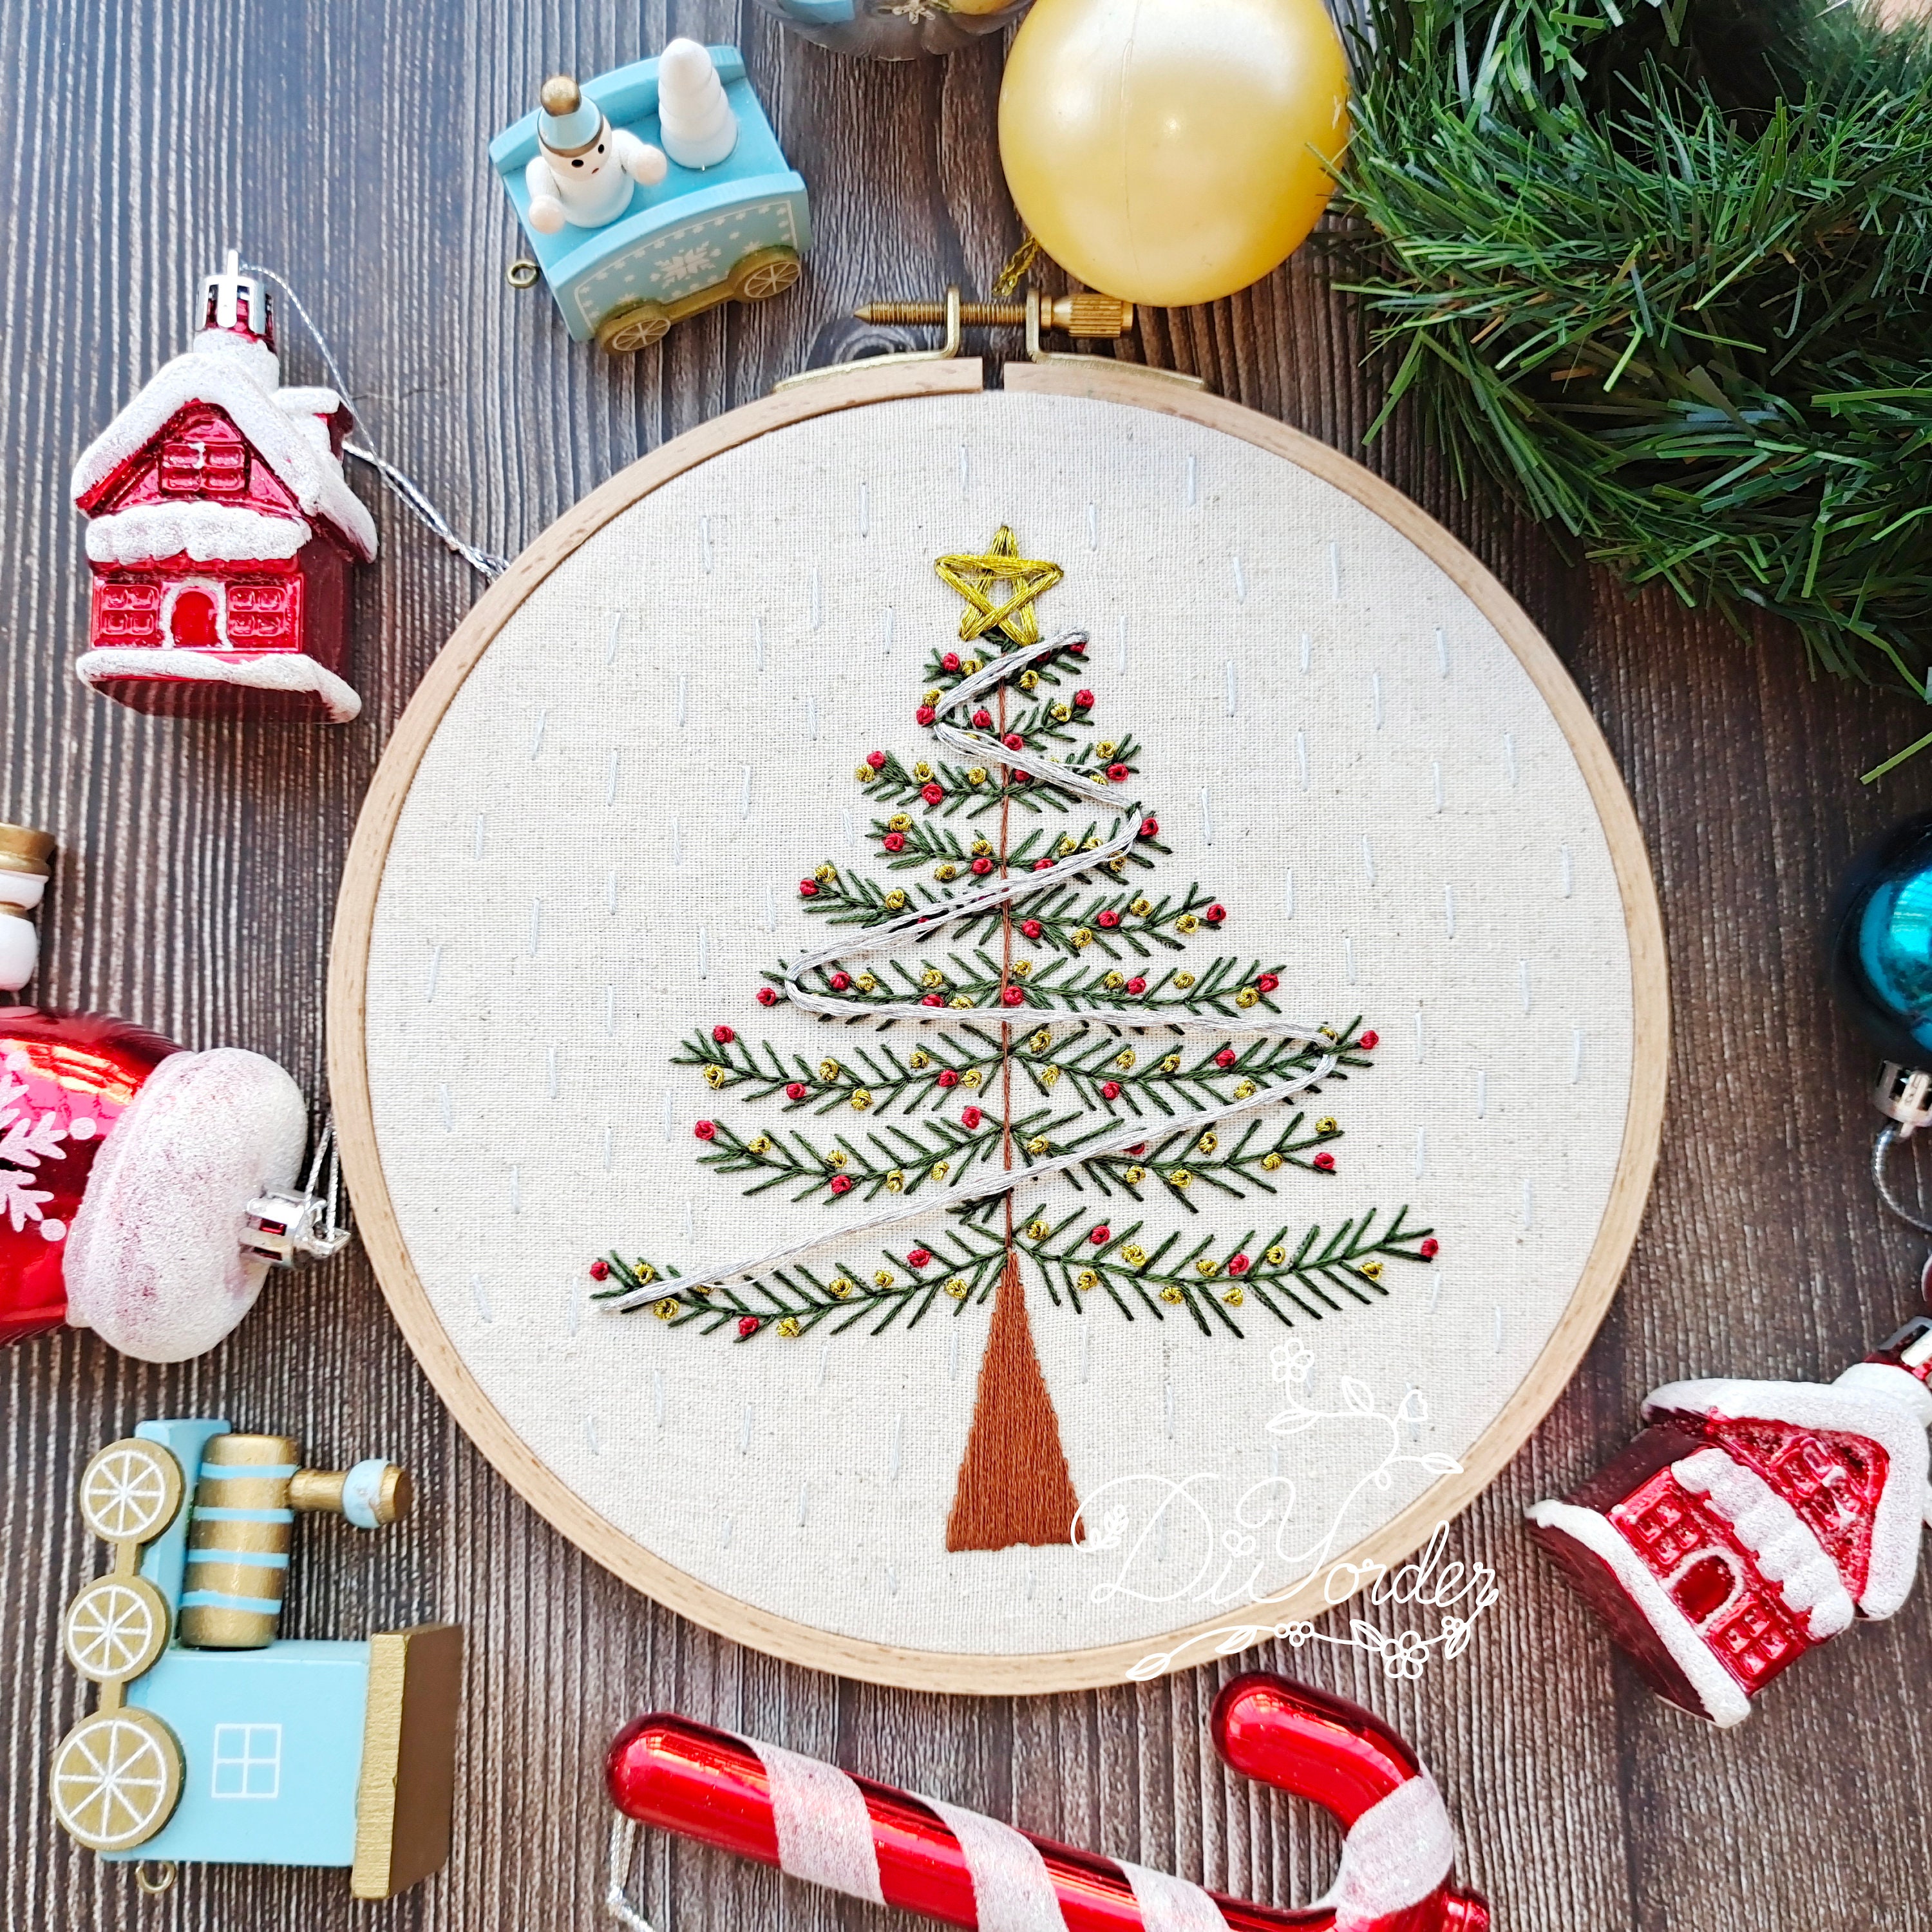 Christmas Ornament Kit, Embroidery Ornament DIY, Festive ornament,  Christmas lights, Ornament Craft Kit, Make At Home, Holiday Ornament Kit —  I Heart Stitch Art: Beginner Embroidery Kits + Patterns